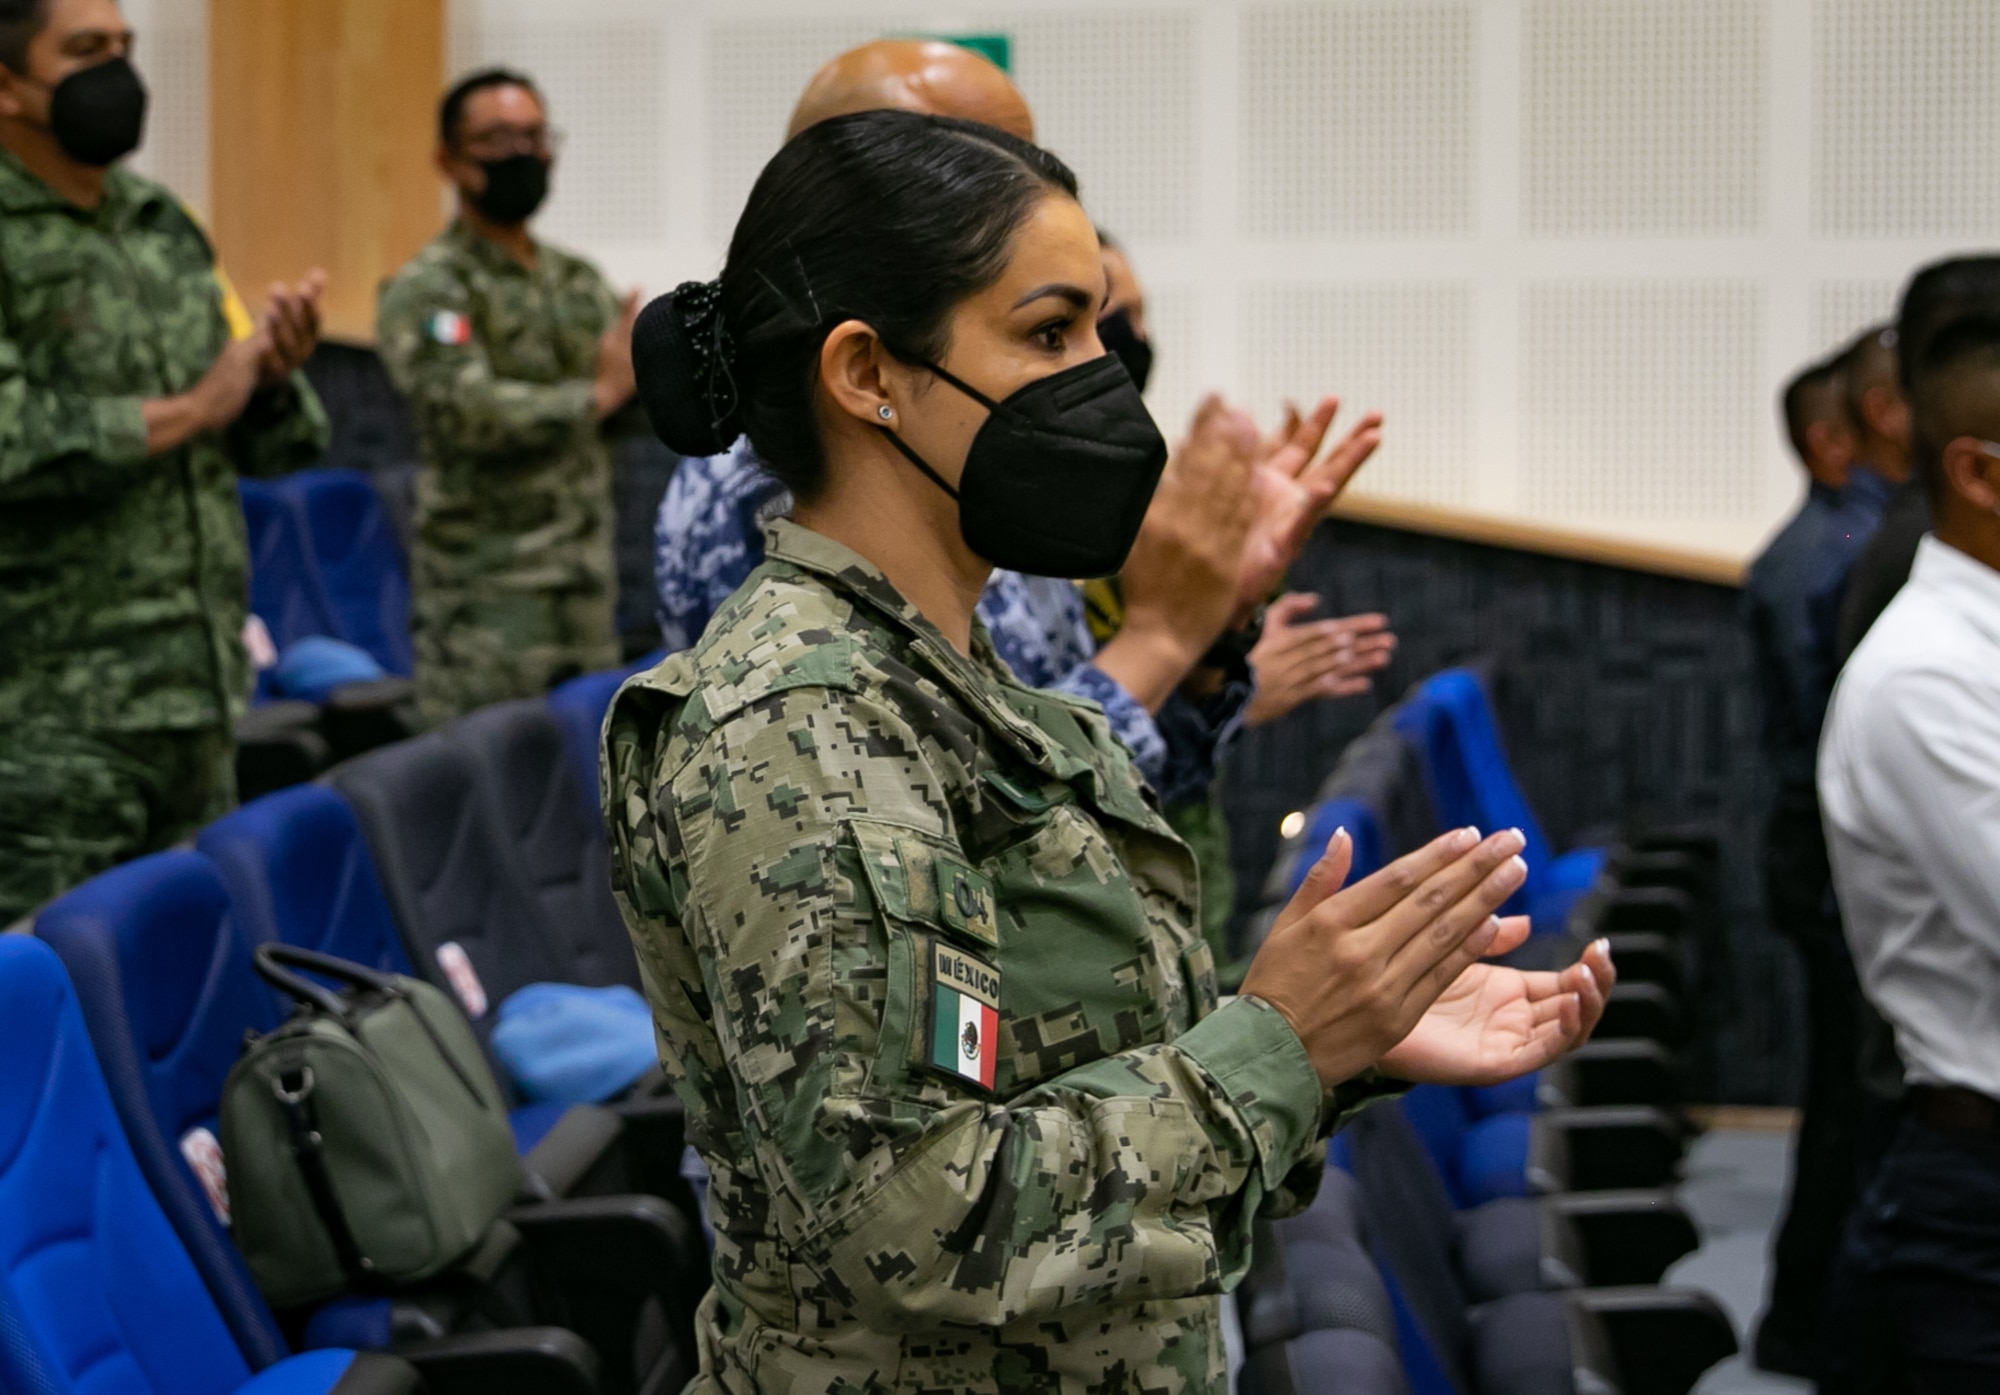 Members of the Mexican armed forces applaud a speaker during the Women in Aerospace and Society Leadership Conference at Base Aérea No.1 de Santa Lucía, Mexico, Sep. 24, 2021. The event was hosted by the Mexican Secretariat of National Defense (SEDENA) and was meant to provide a forum for women leaders to share experiences and inspire future generations of women to pursue leadership opportunities. (U.S. Air Force photo by 2nd Lt. Danny Rangel)